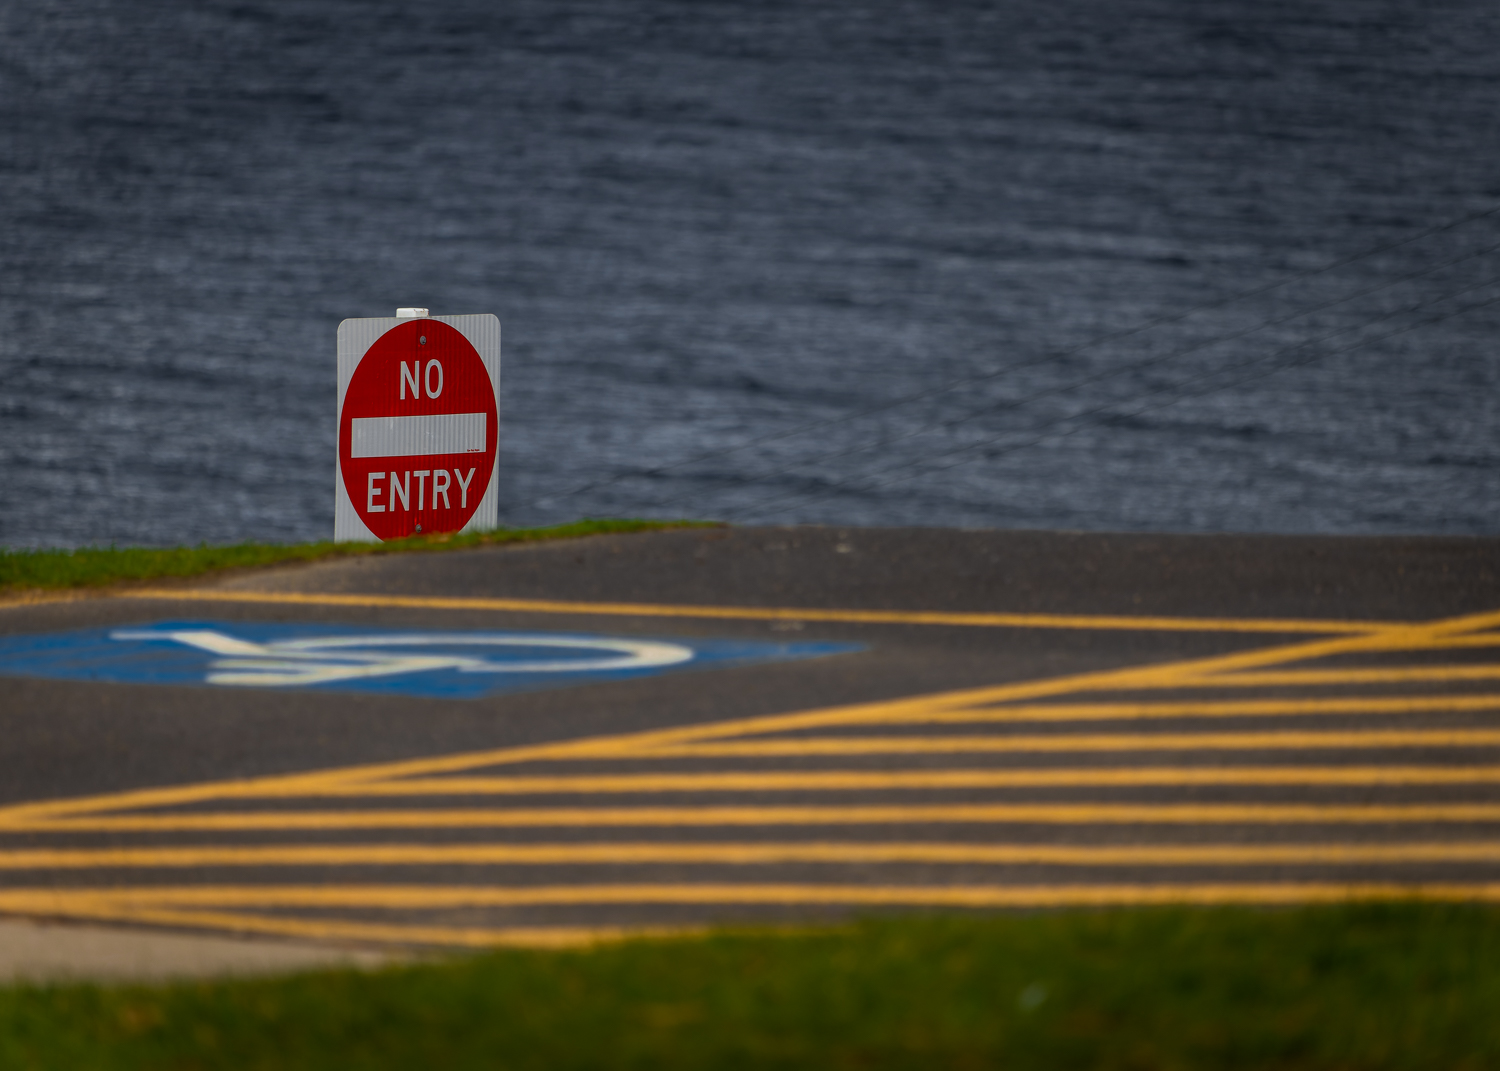 Yellow parallel lines on bitumen next to a blue and white painted wheelchair on the ground, green grass and a red and white 'no entry' sign, all in front of blue rippling water